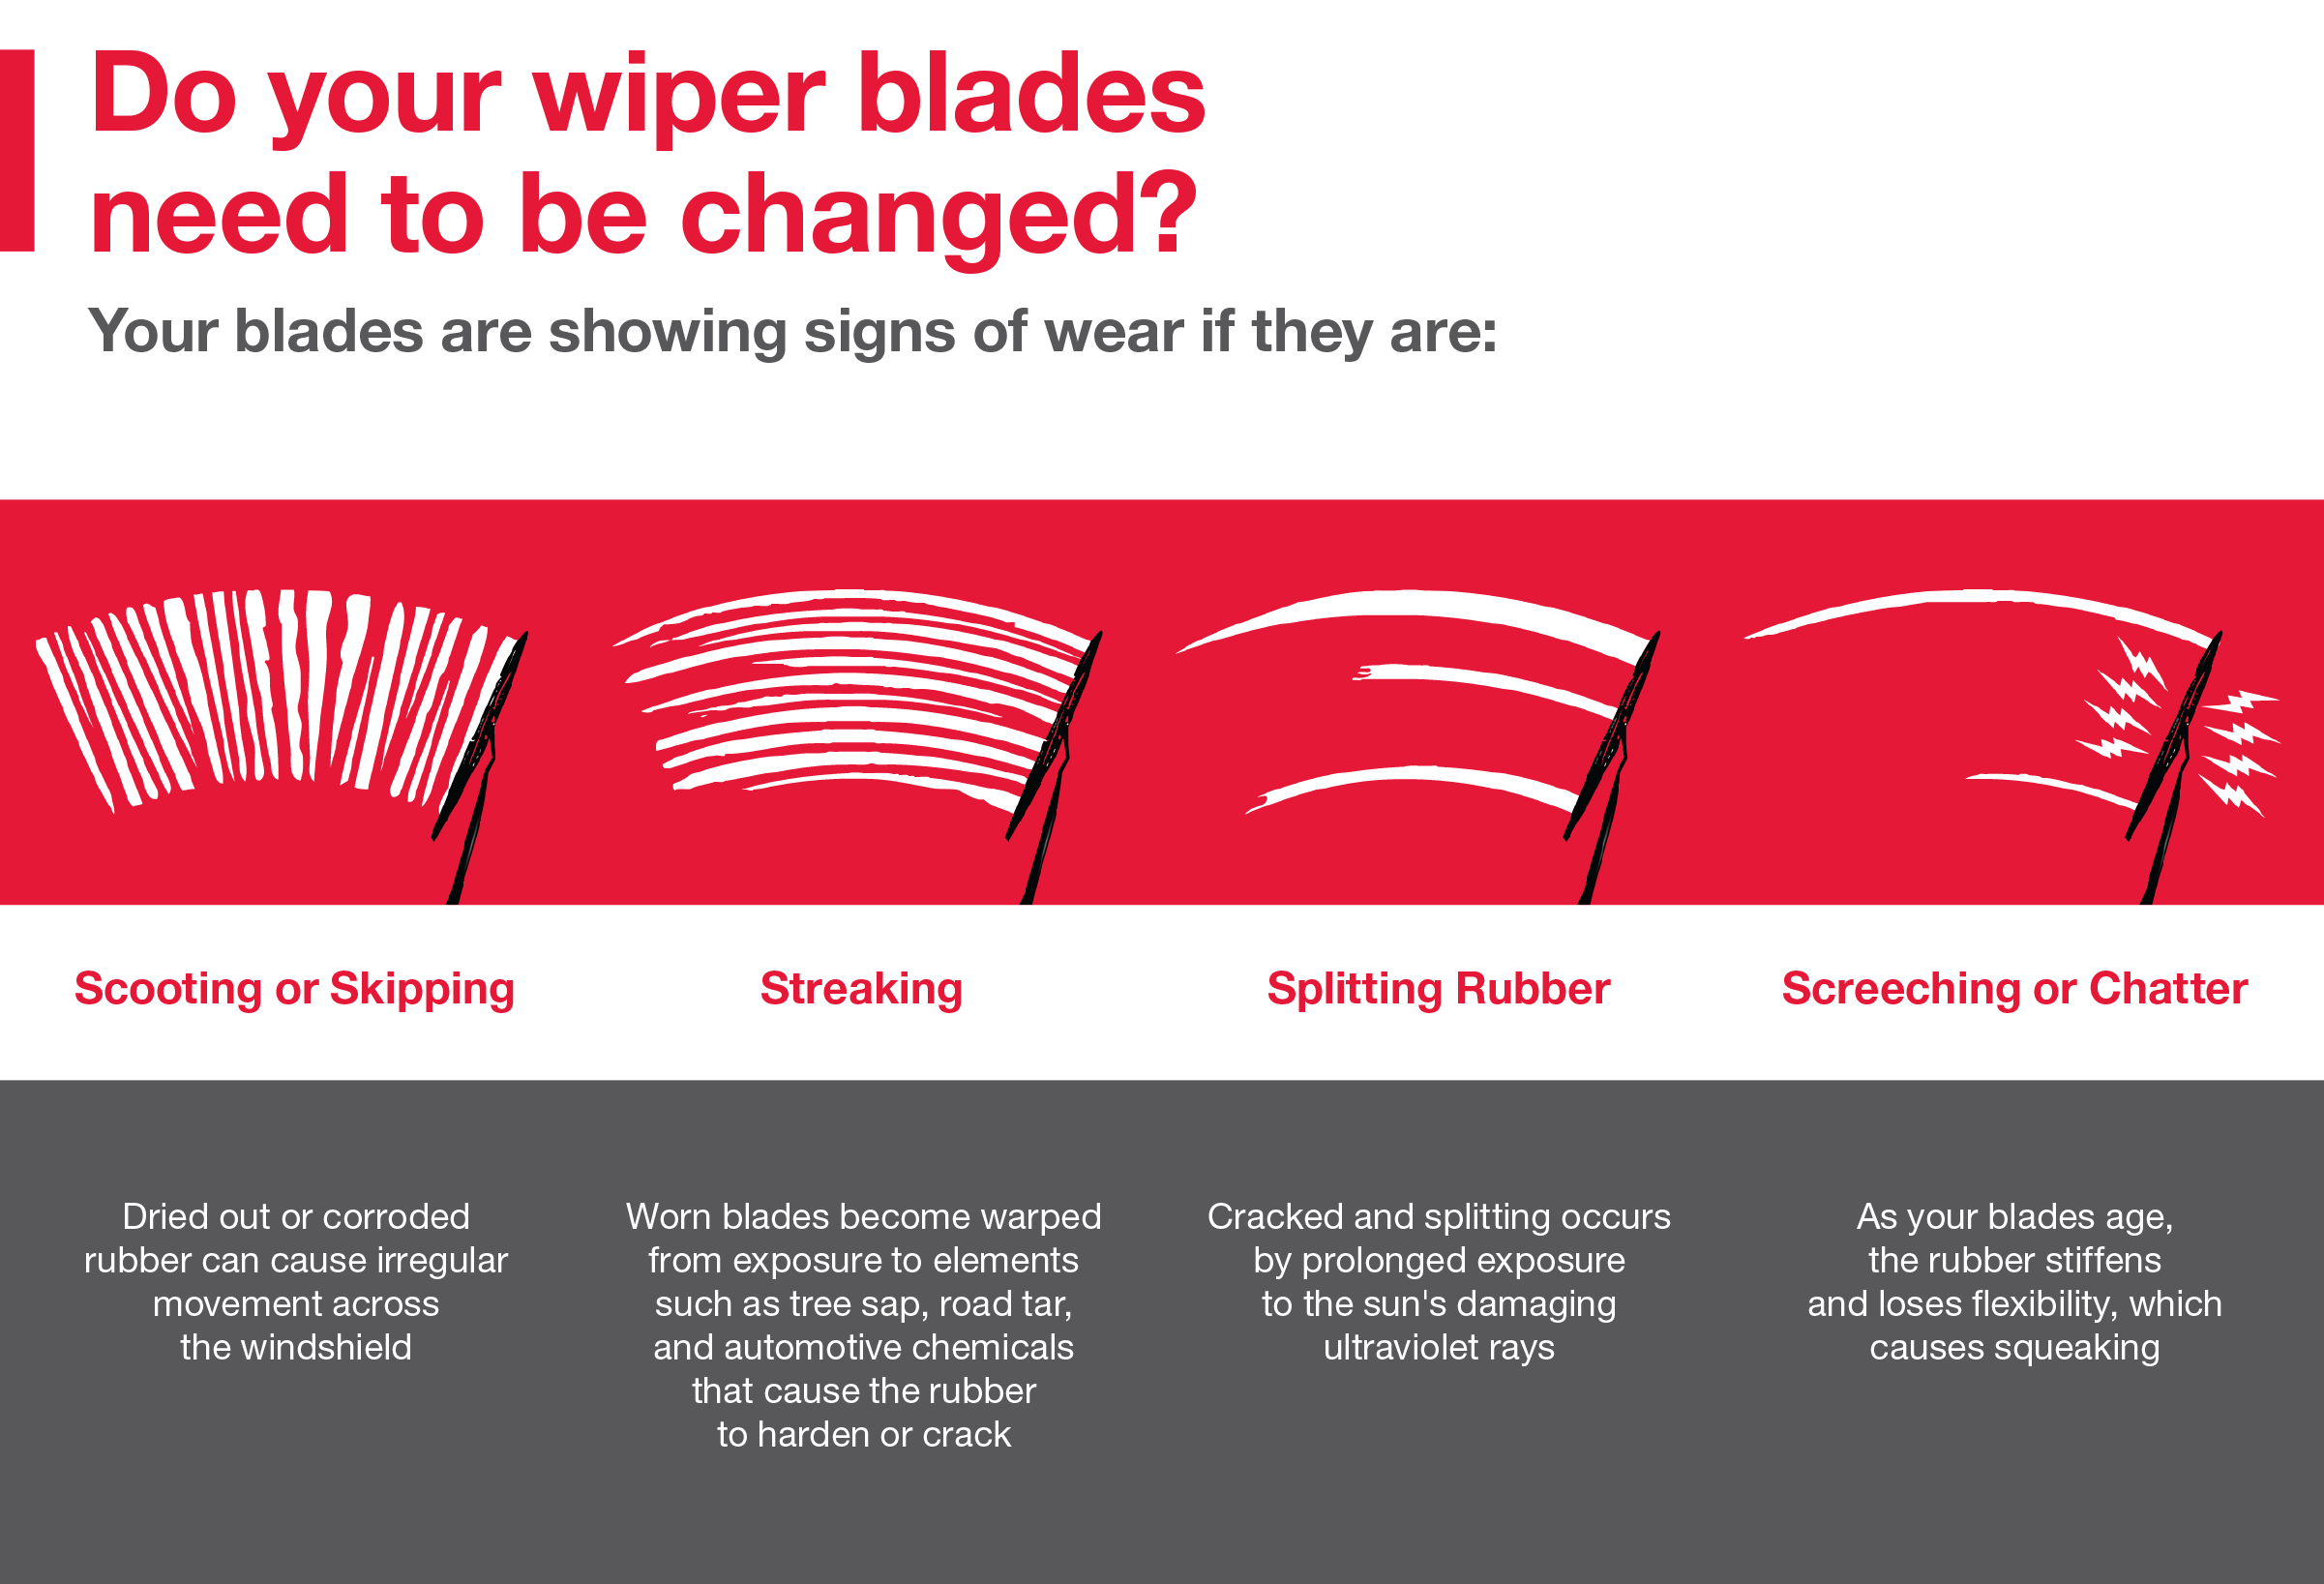 Do your wiper blades need to be changed | Thousand Oaks Toyota in Thousand Oaks CA